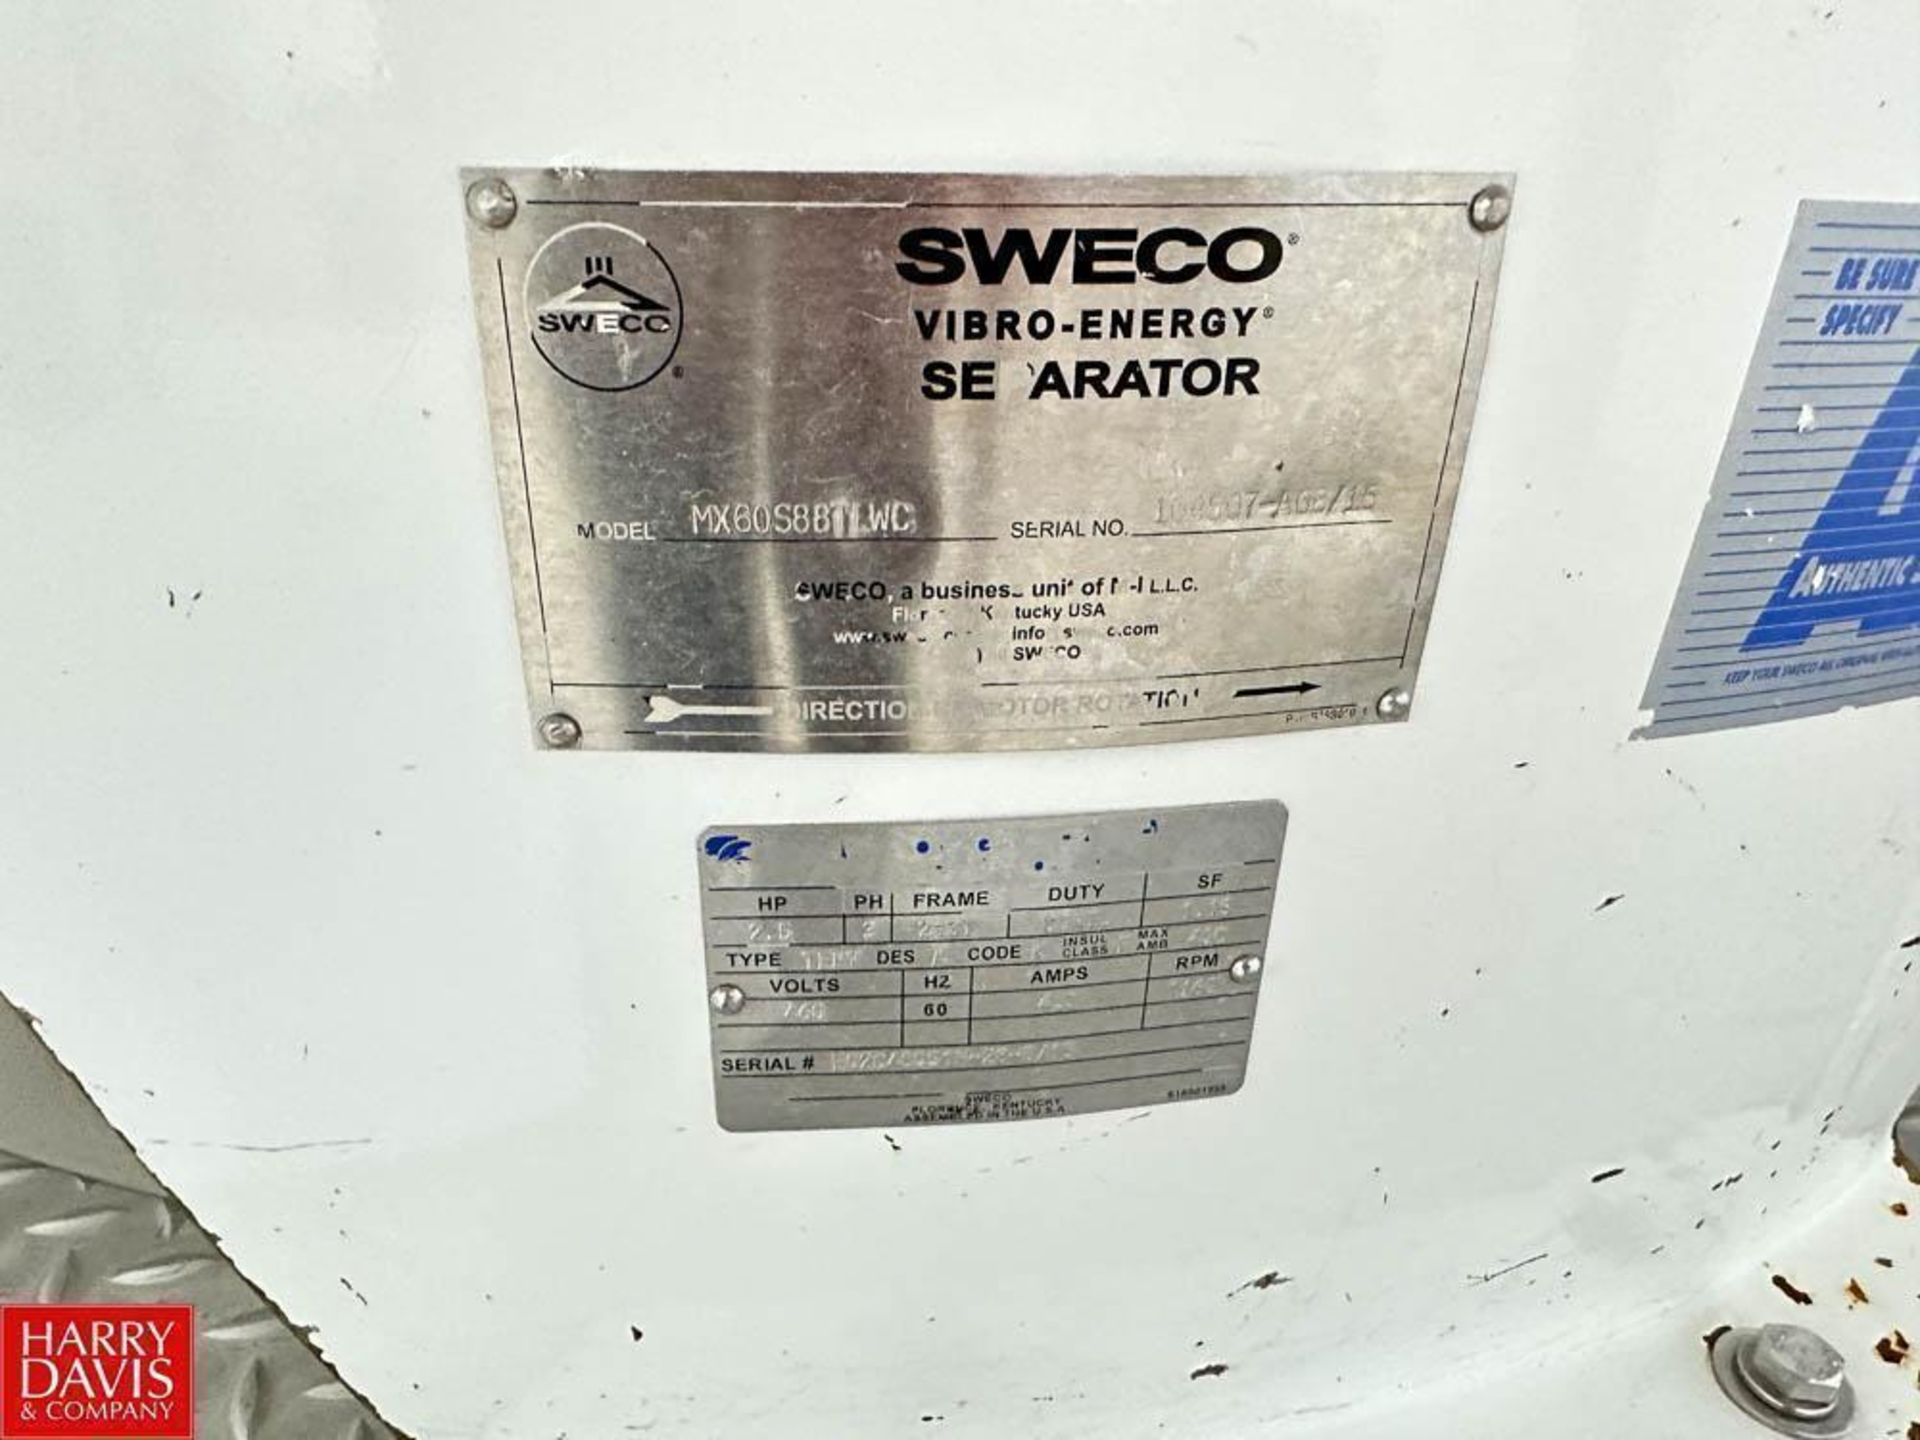 Sweco 60" Vibro-Energy Separator, Model: MX60588TLWC, S/N: 104507-A08/15 with S/S Platform - Image 4 of 8